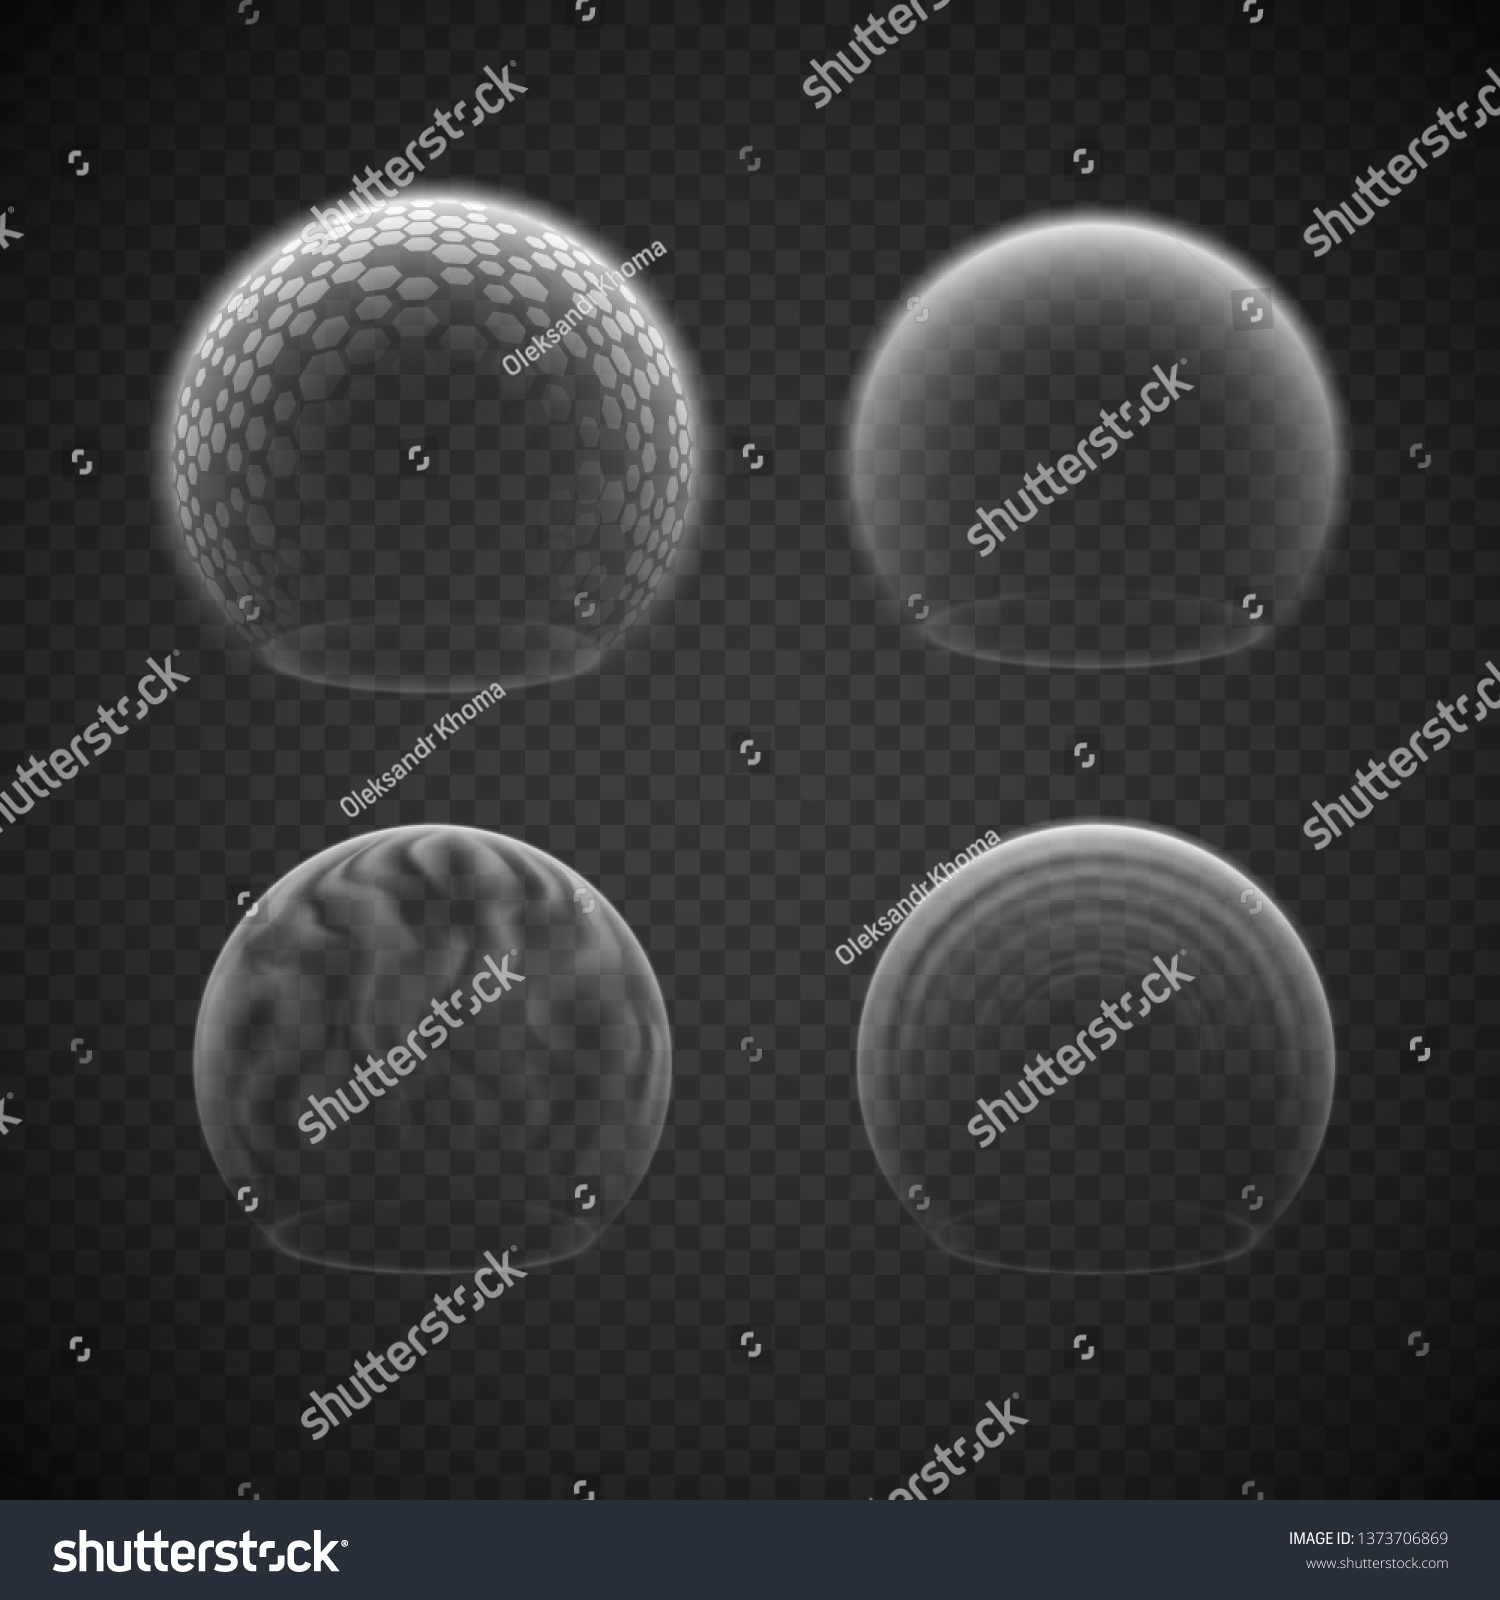 Force field set isolated on transparency grid, various energy or defense shields, deflector or force bubble, science fiction element or metaphor of absolute protection